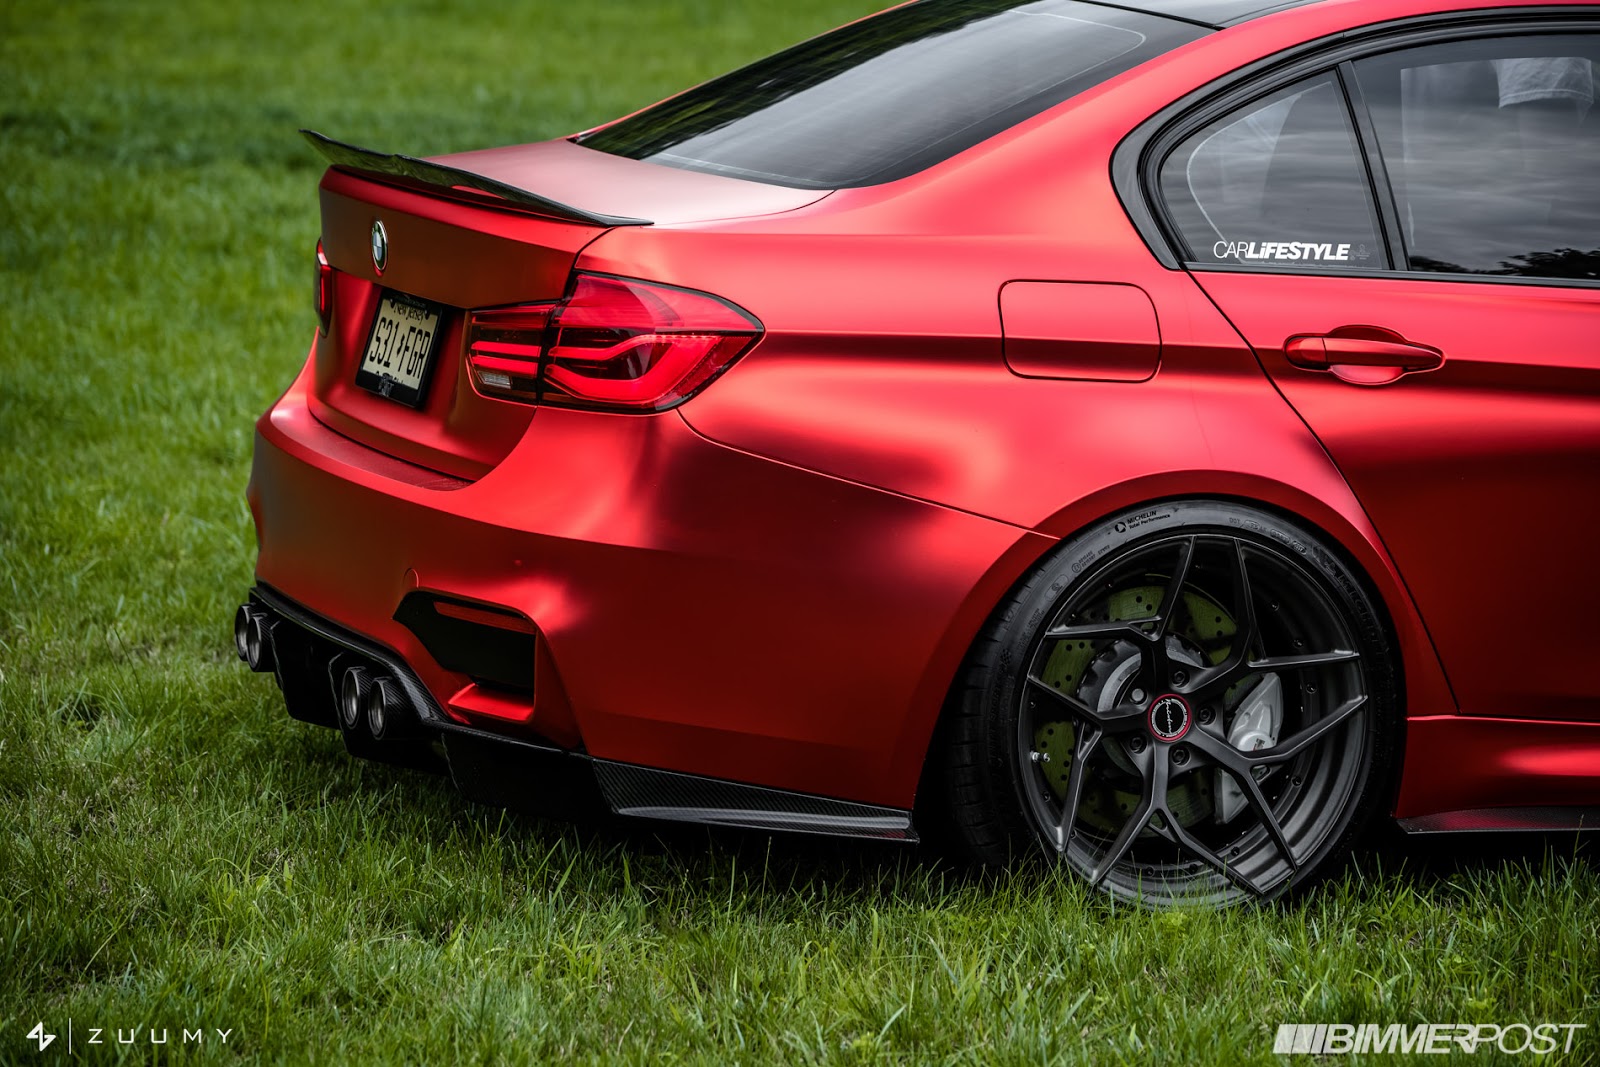 What Do You Say About This Satin Red BMW M3 Tune? | Carscoops